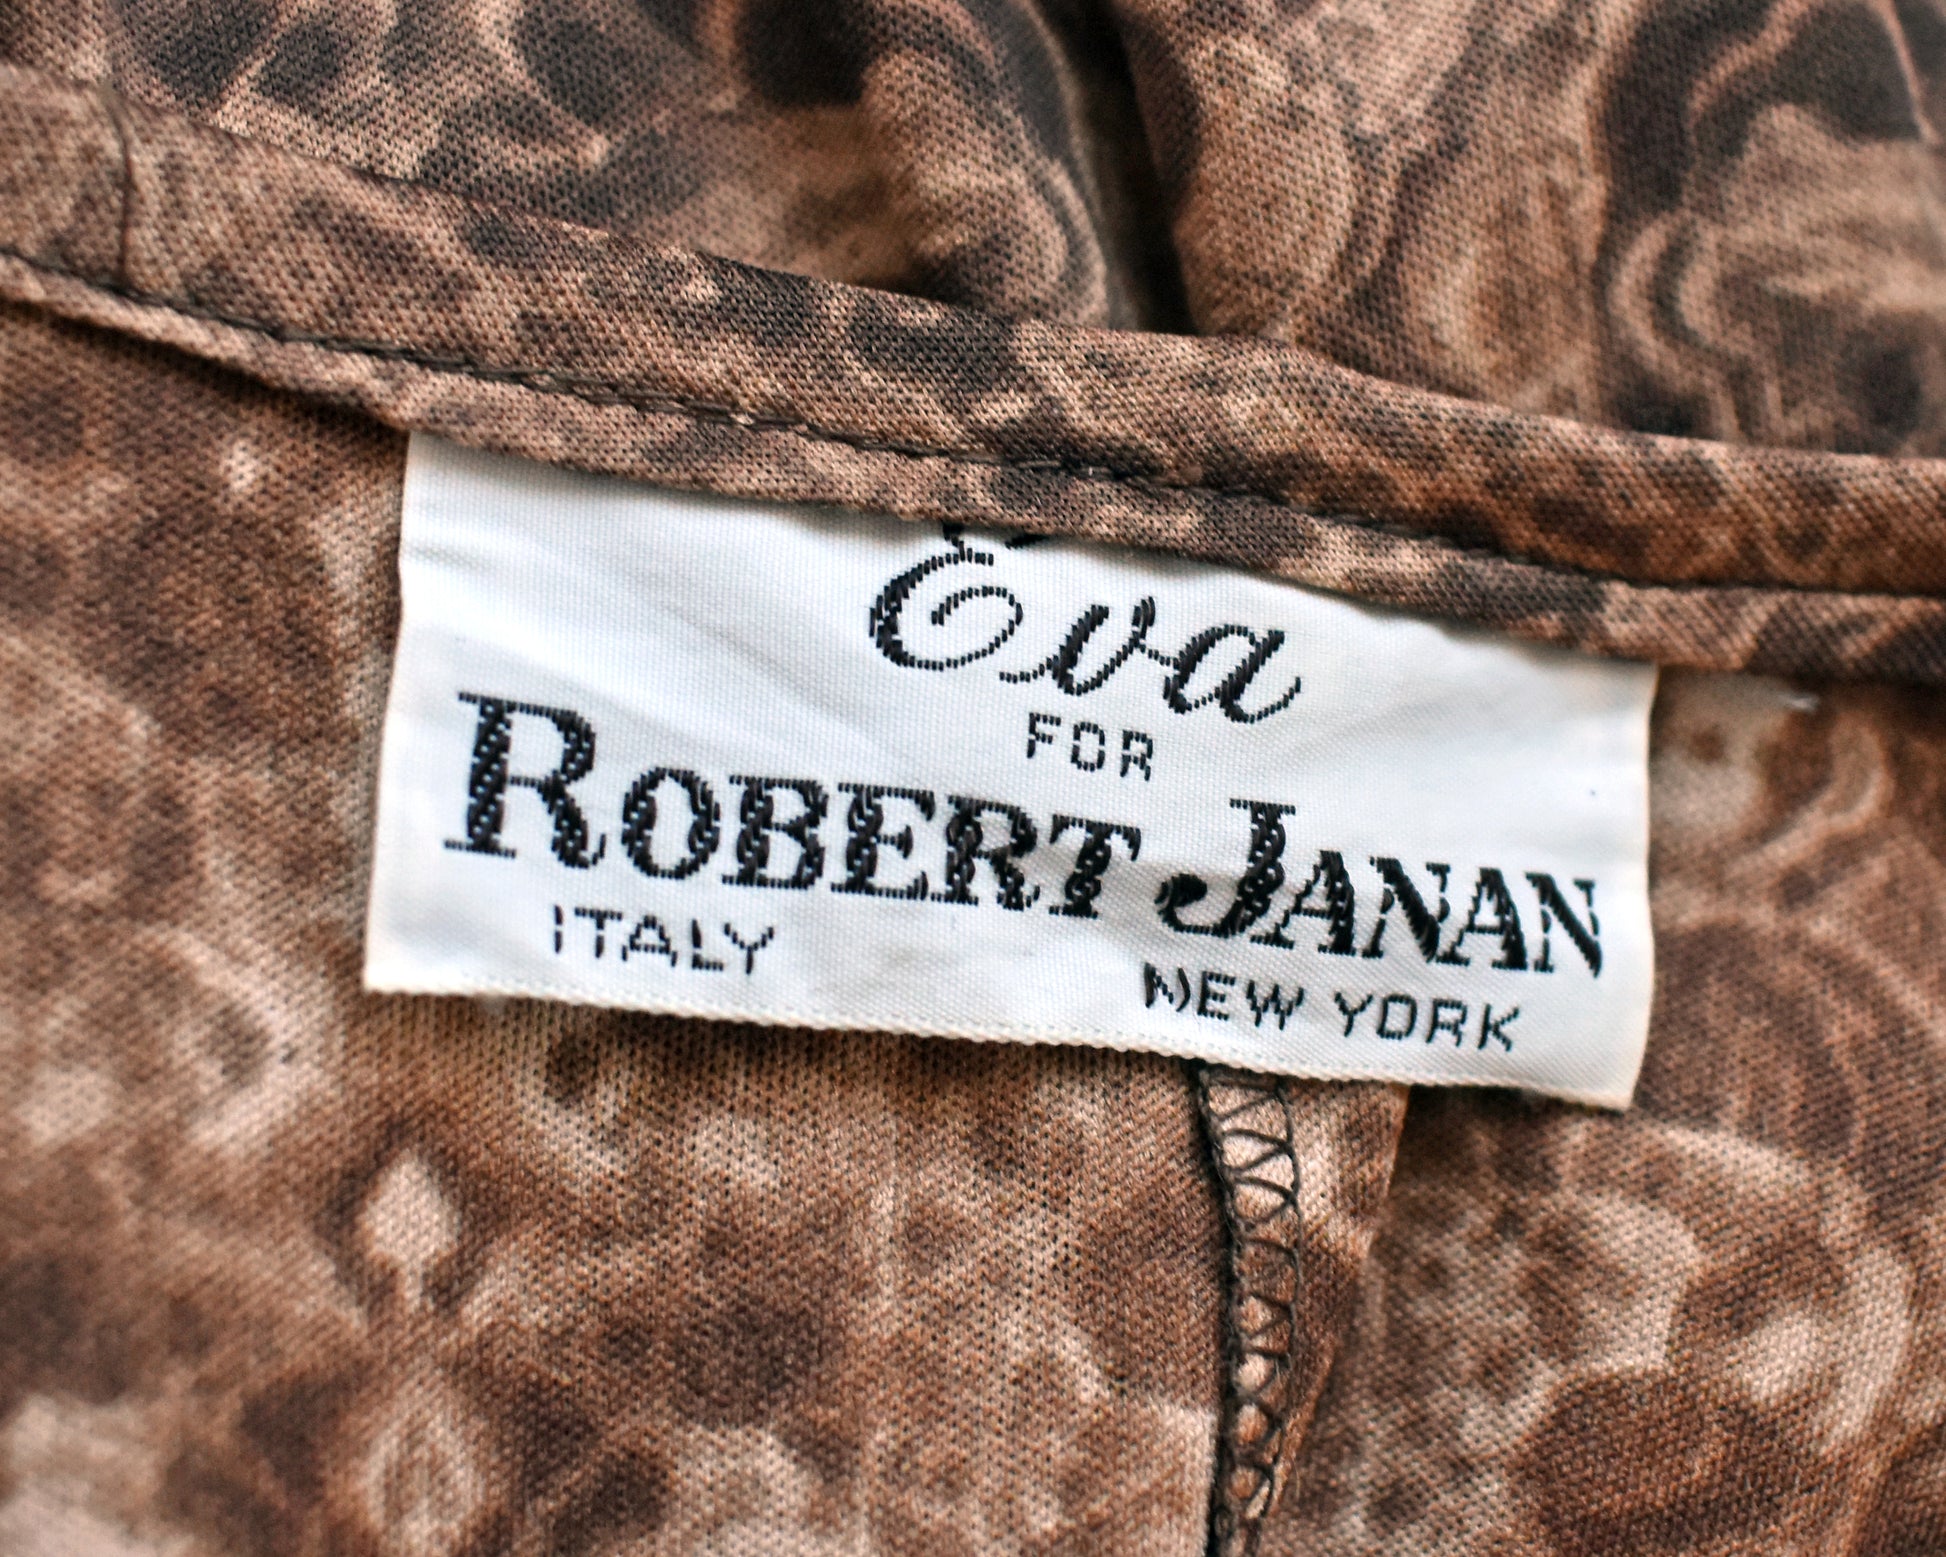 Close up of the tag which says Eva for Robert Janan Italy New York